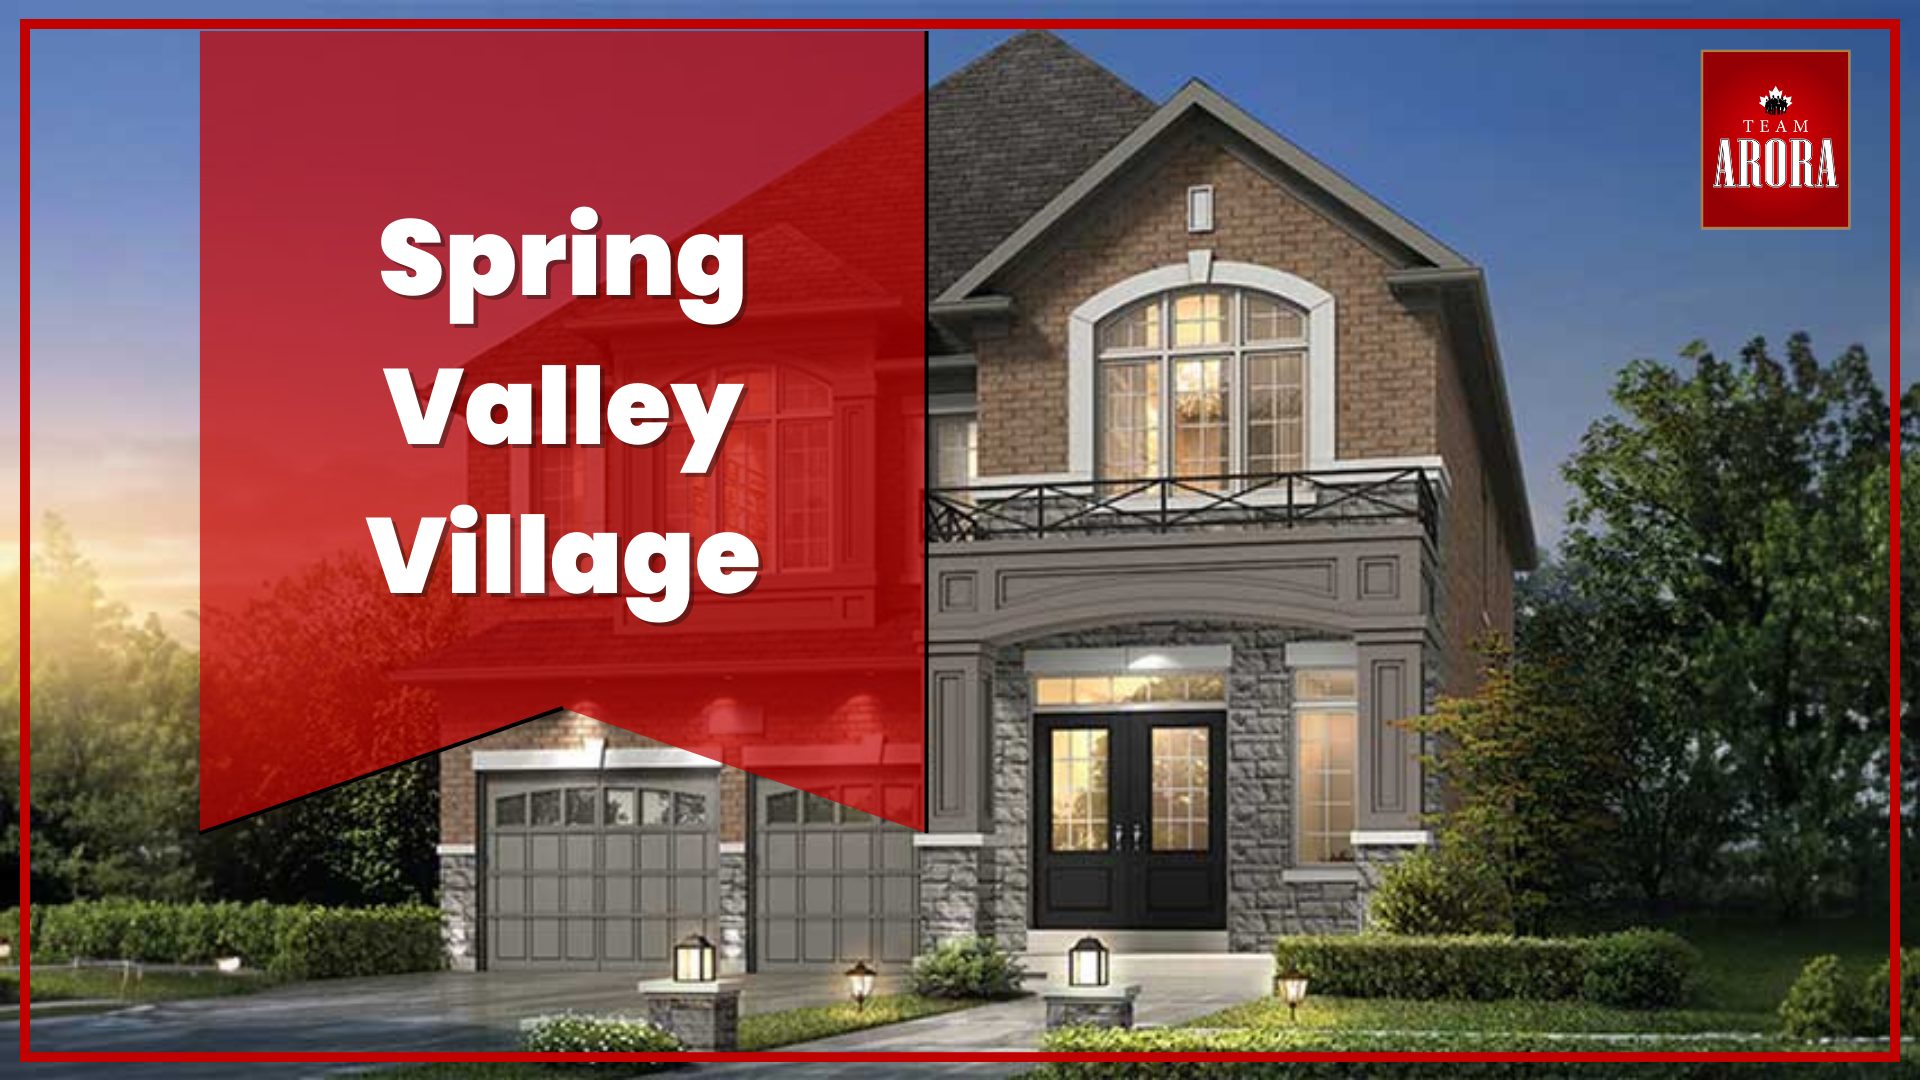 Spring Valley Village: A New Community of 38′ Detached Homes in Brampton